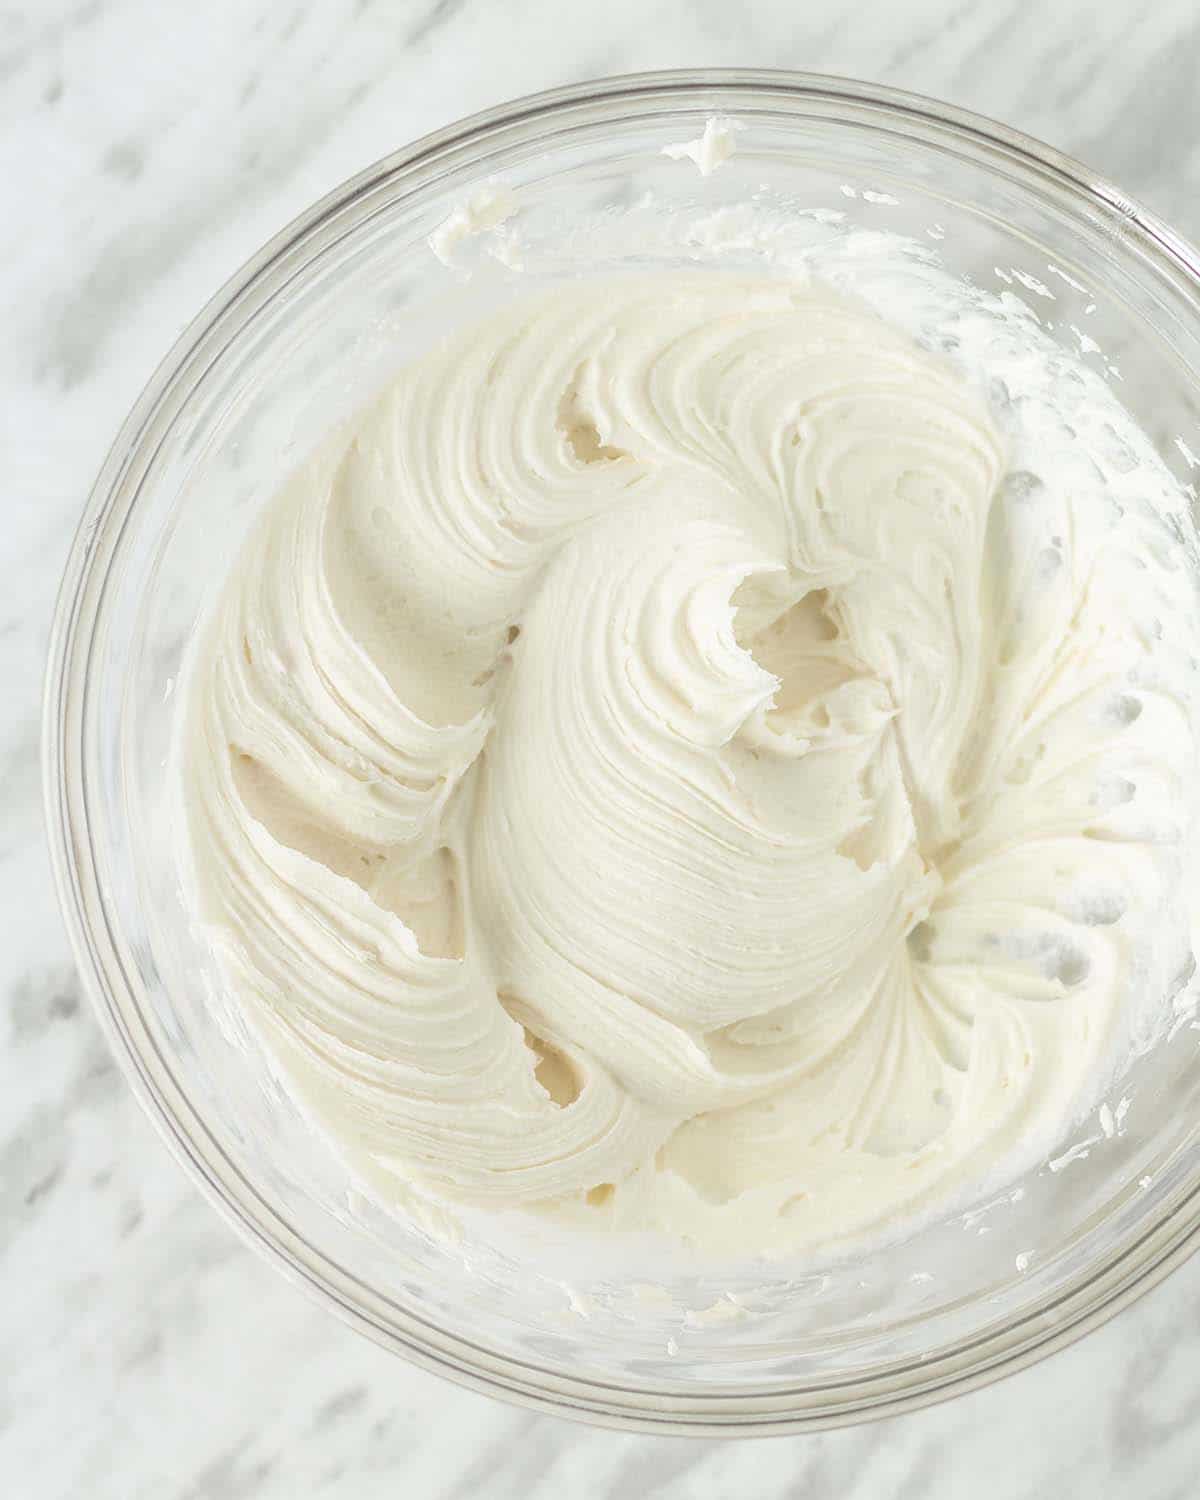 An overhead shot showing a bowl of freshly made vegan cream cheese icing.